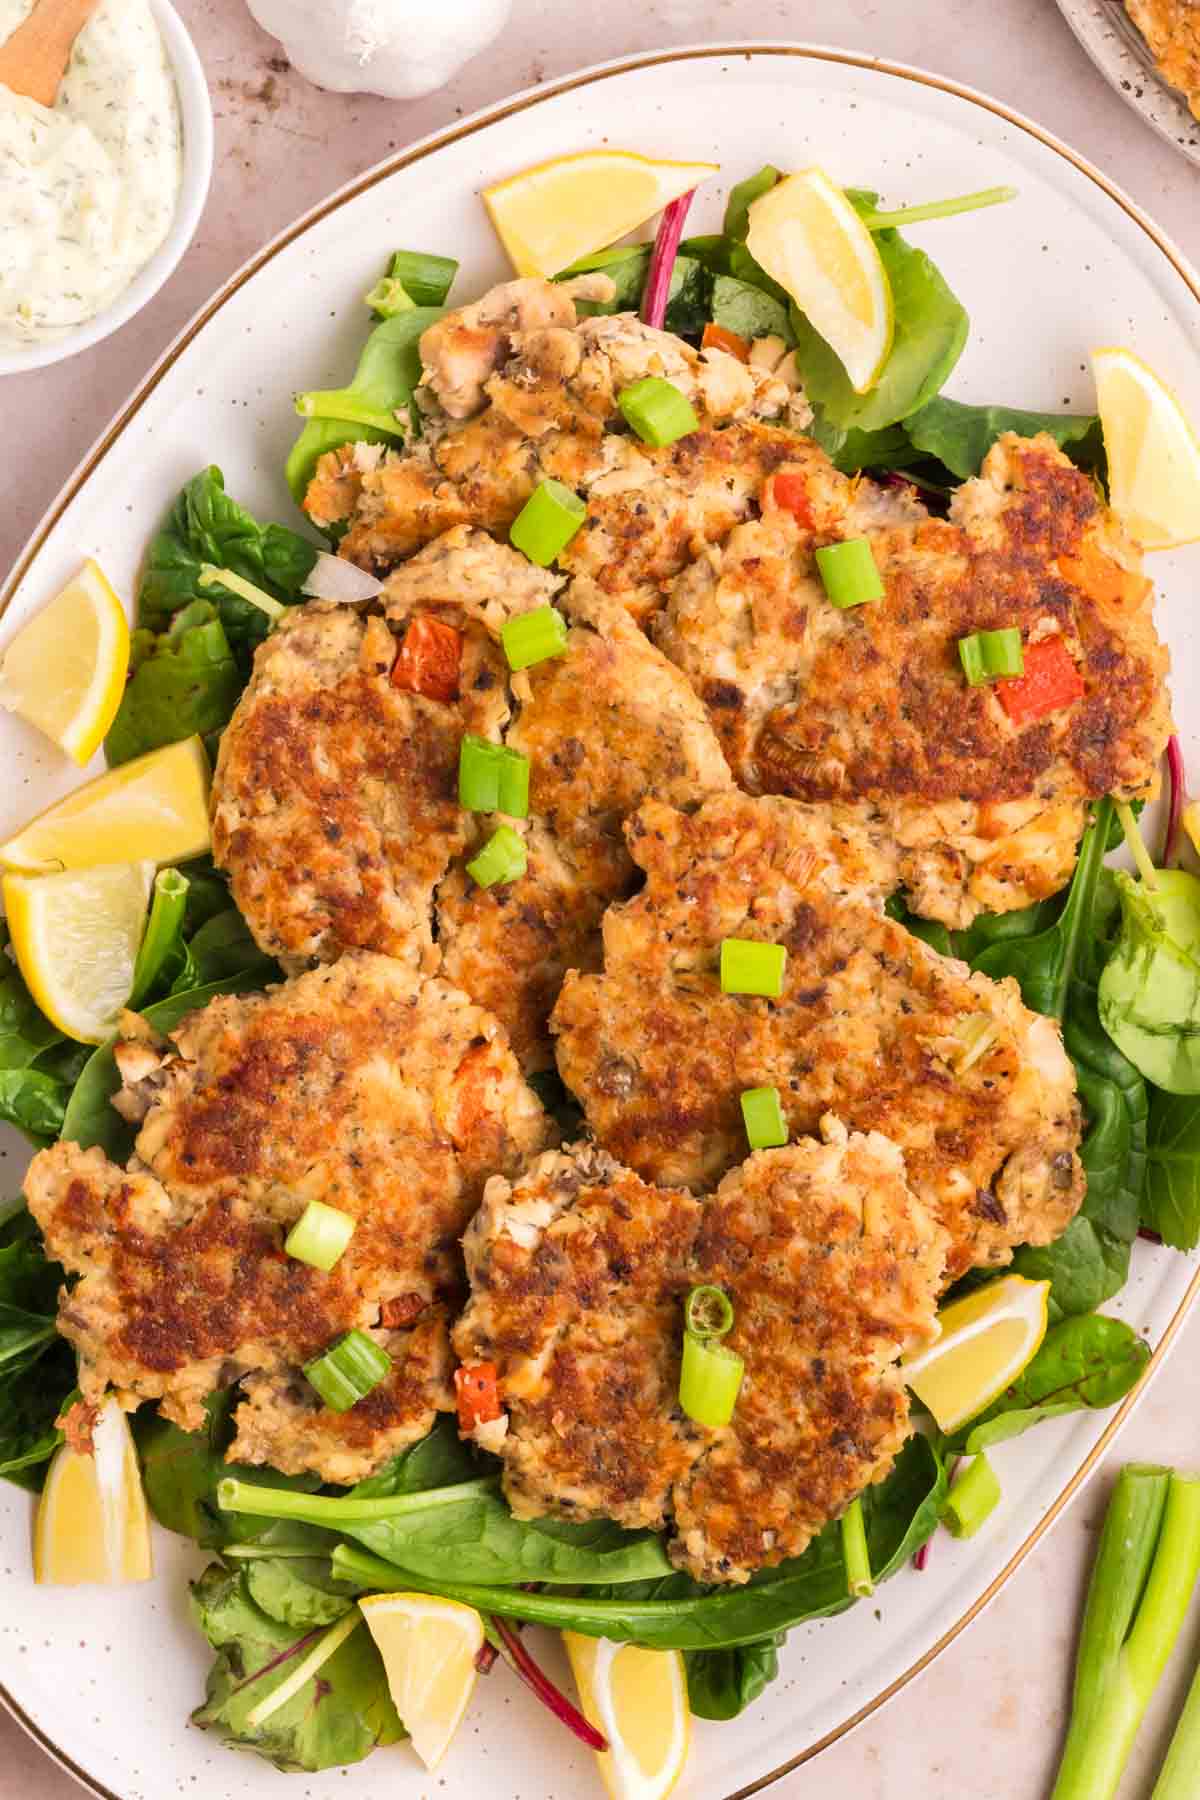 Salmon cakes on a serving tray with lemon wedges.